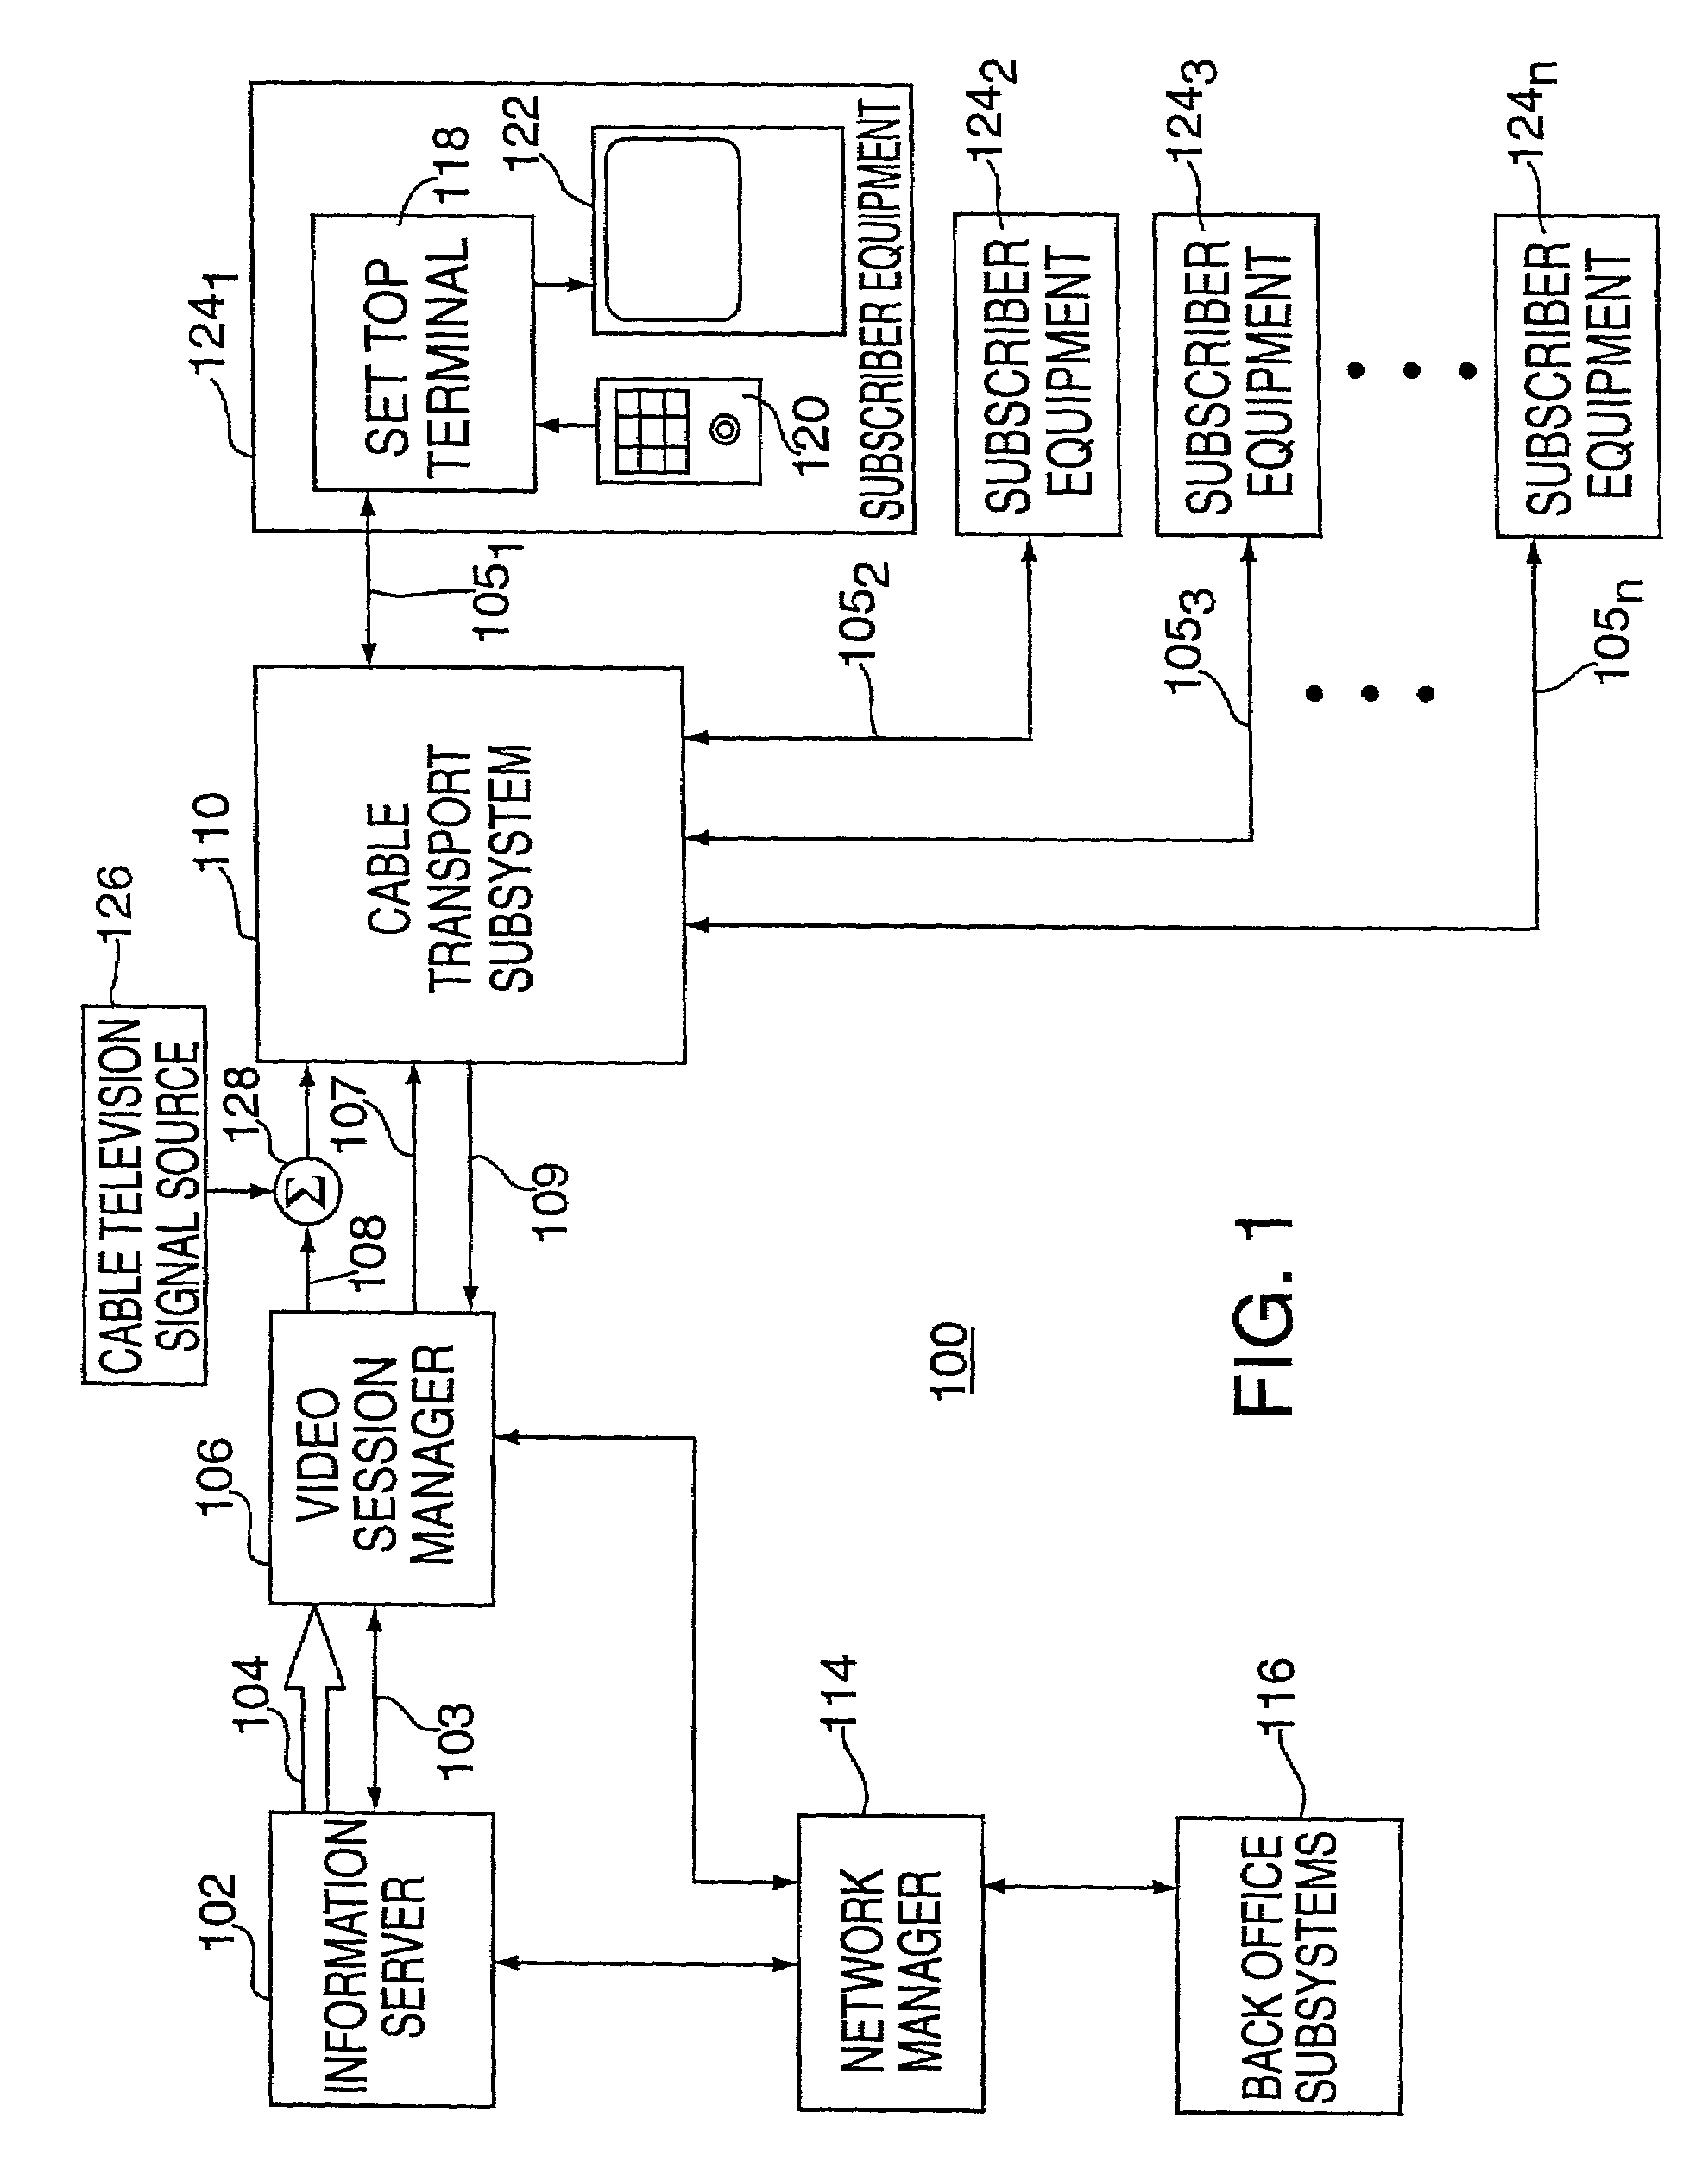 System for interactively distributing information services